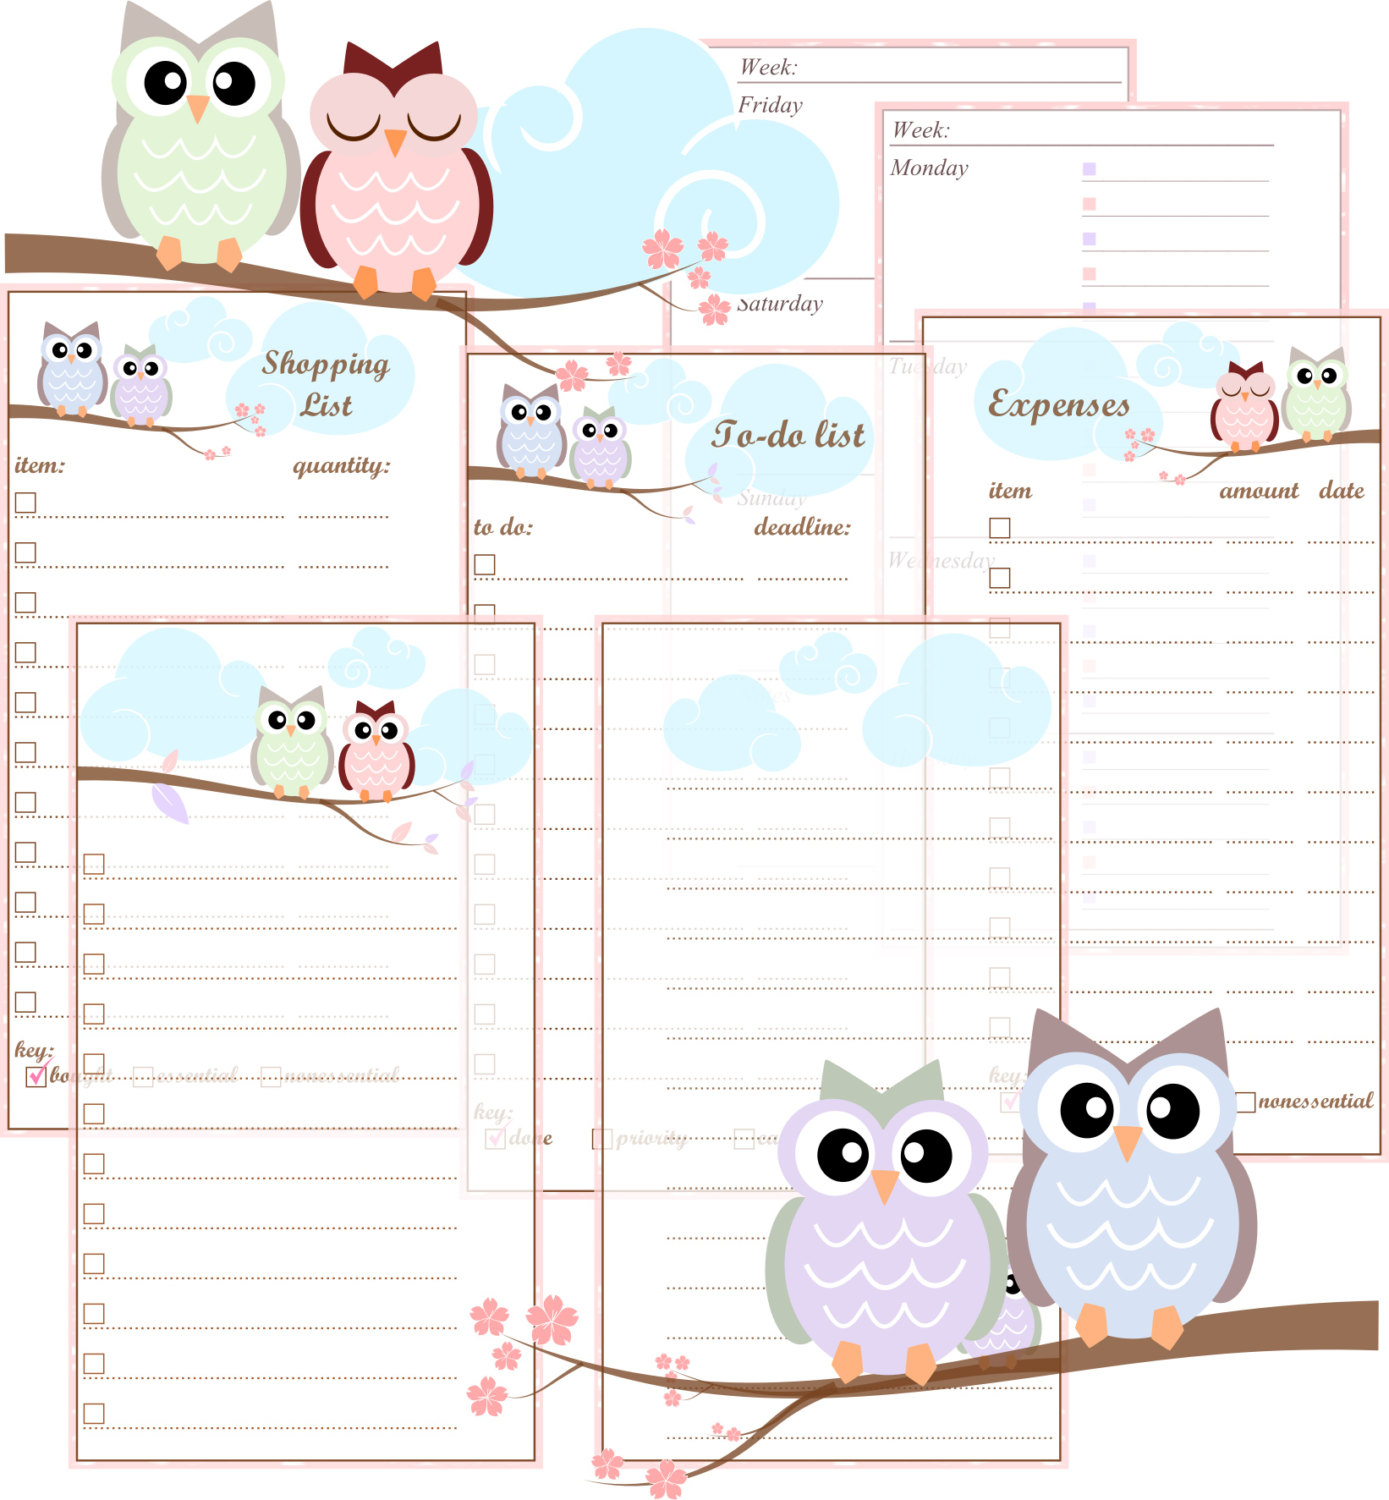 6 Best Images of Free Personal Filofax Printable Inserts - Free